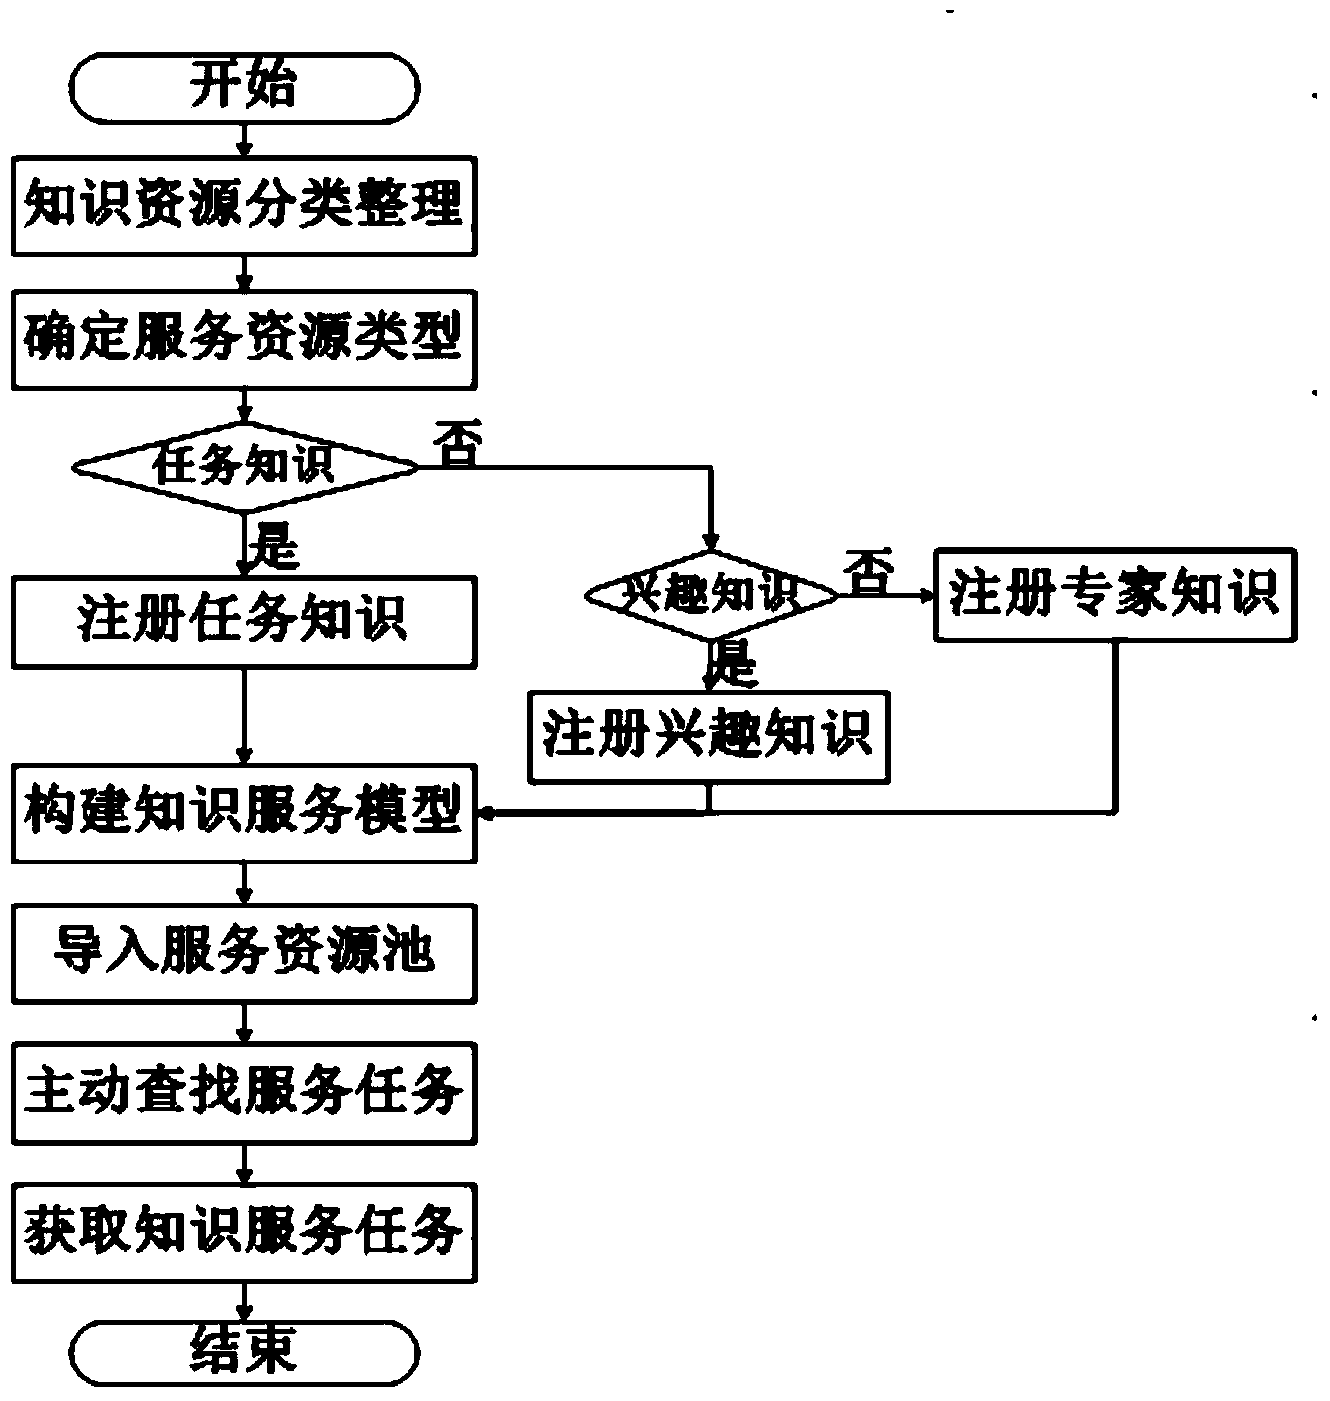 Product design knowledge management service mechanism and matching method